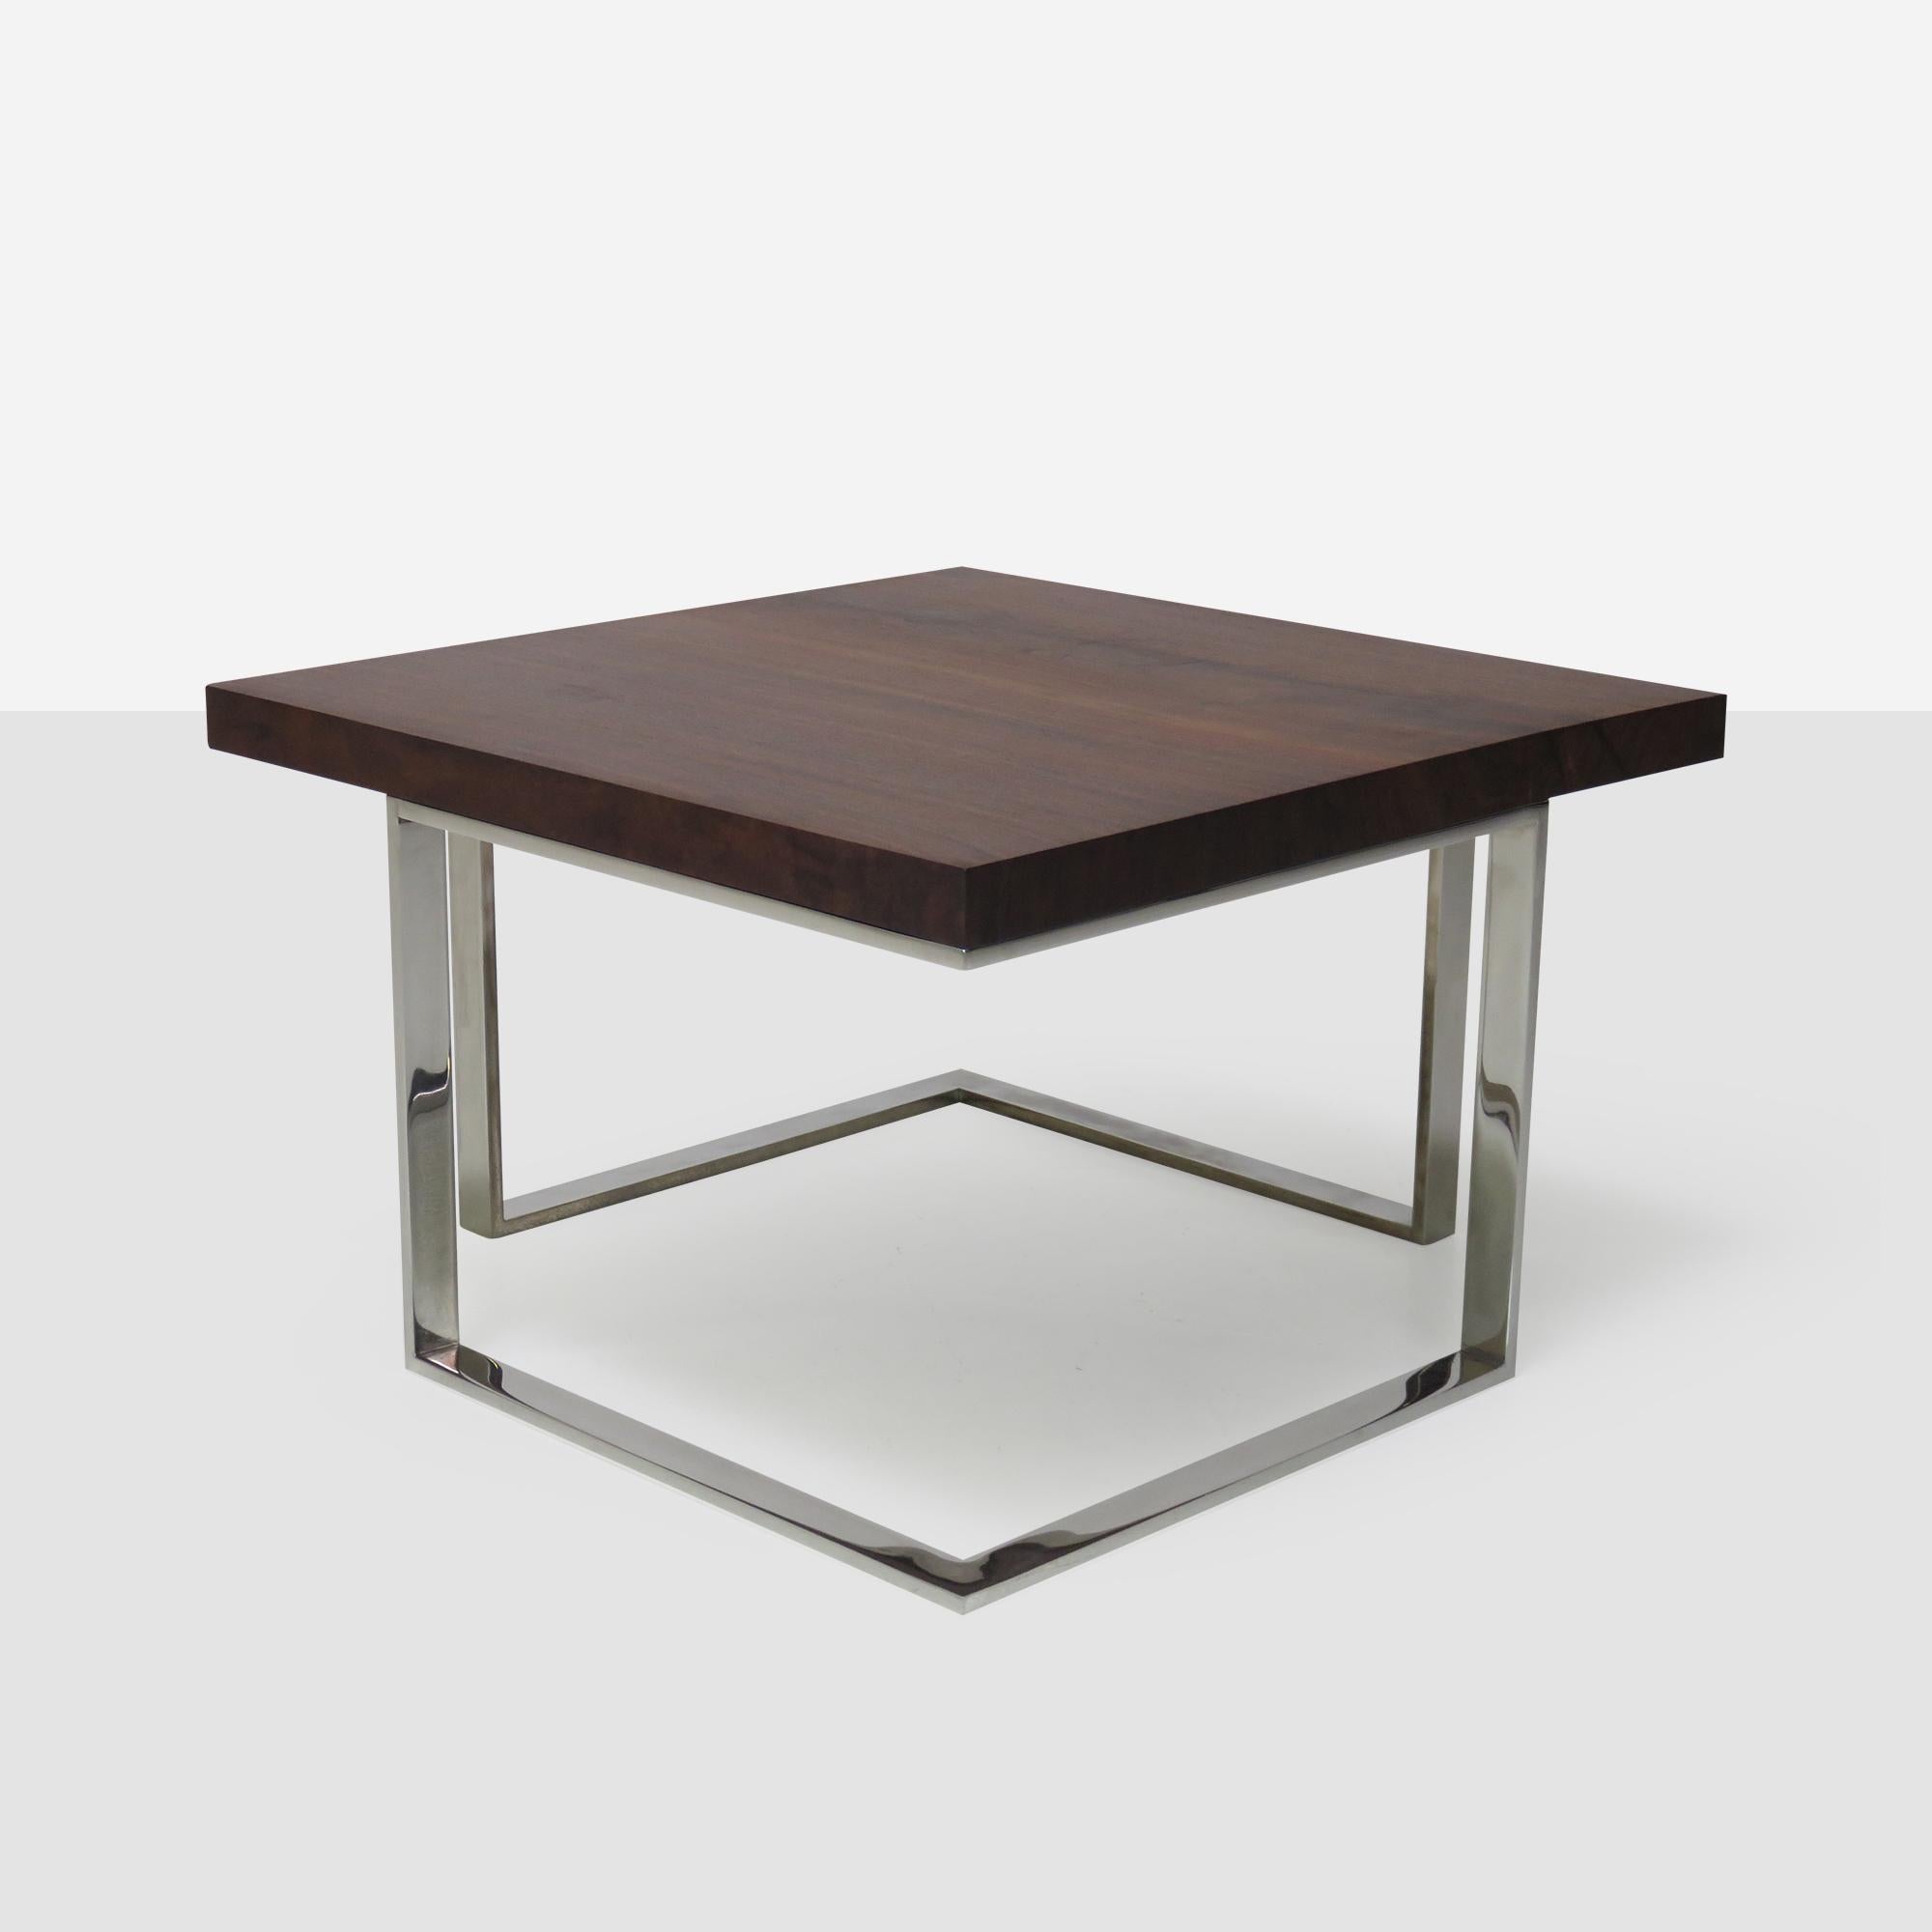 A solid walnut top on a chromed steel base. A modern construction in the style of Milo Baughman. 